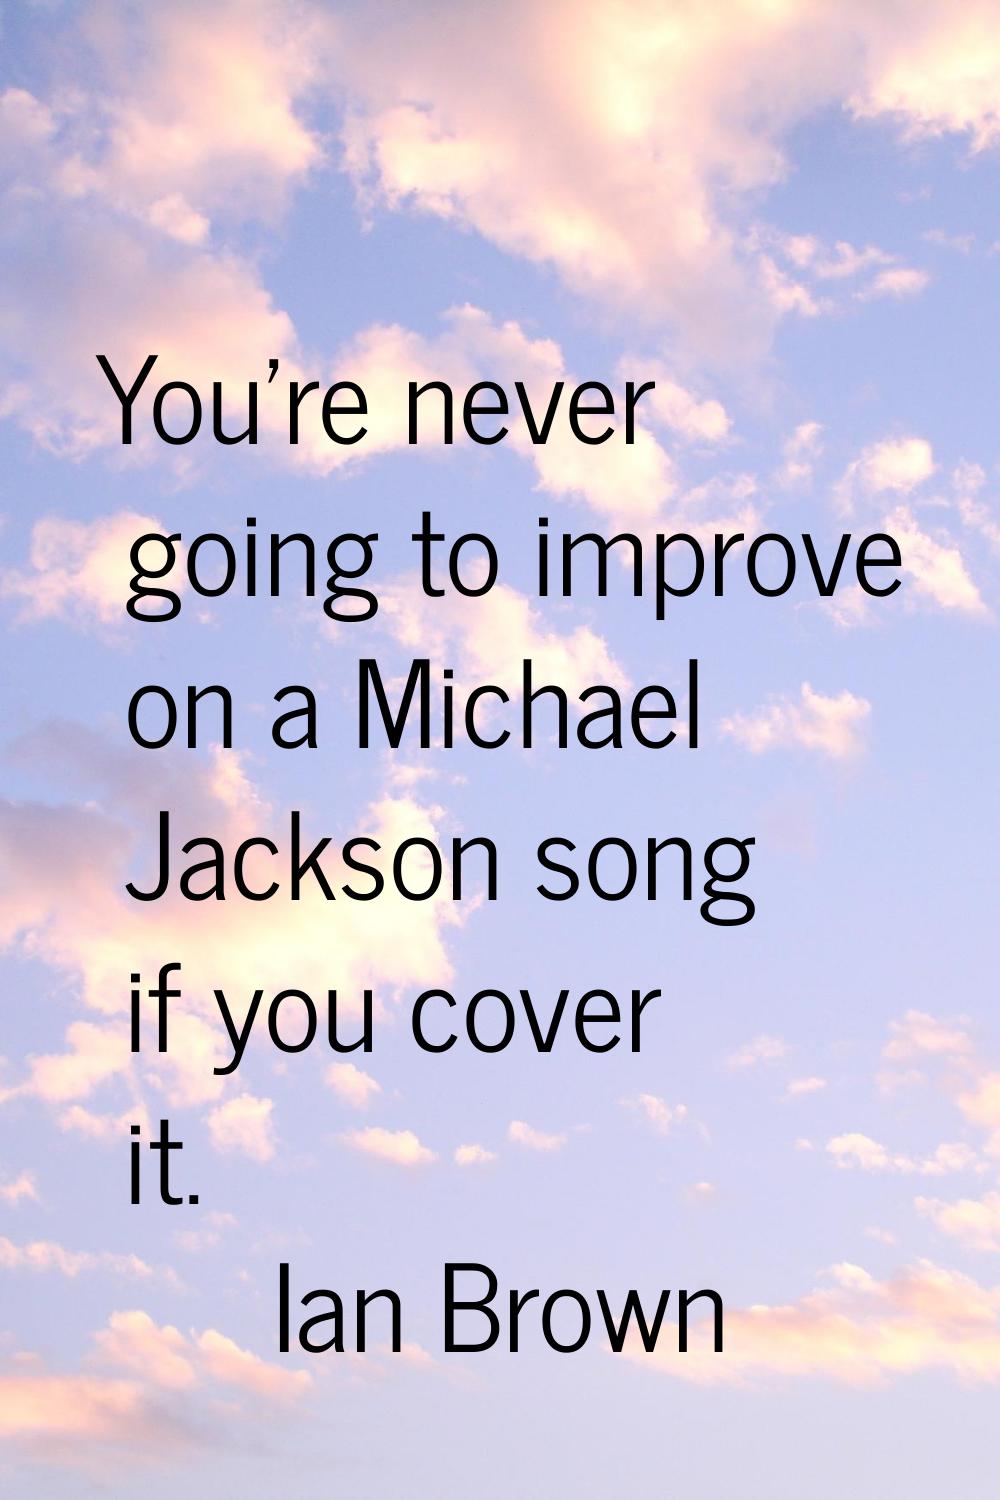 You're never going to improve on a Michael Jackson song if you cover it.